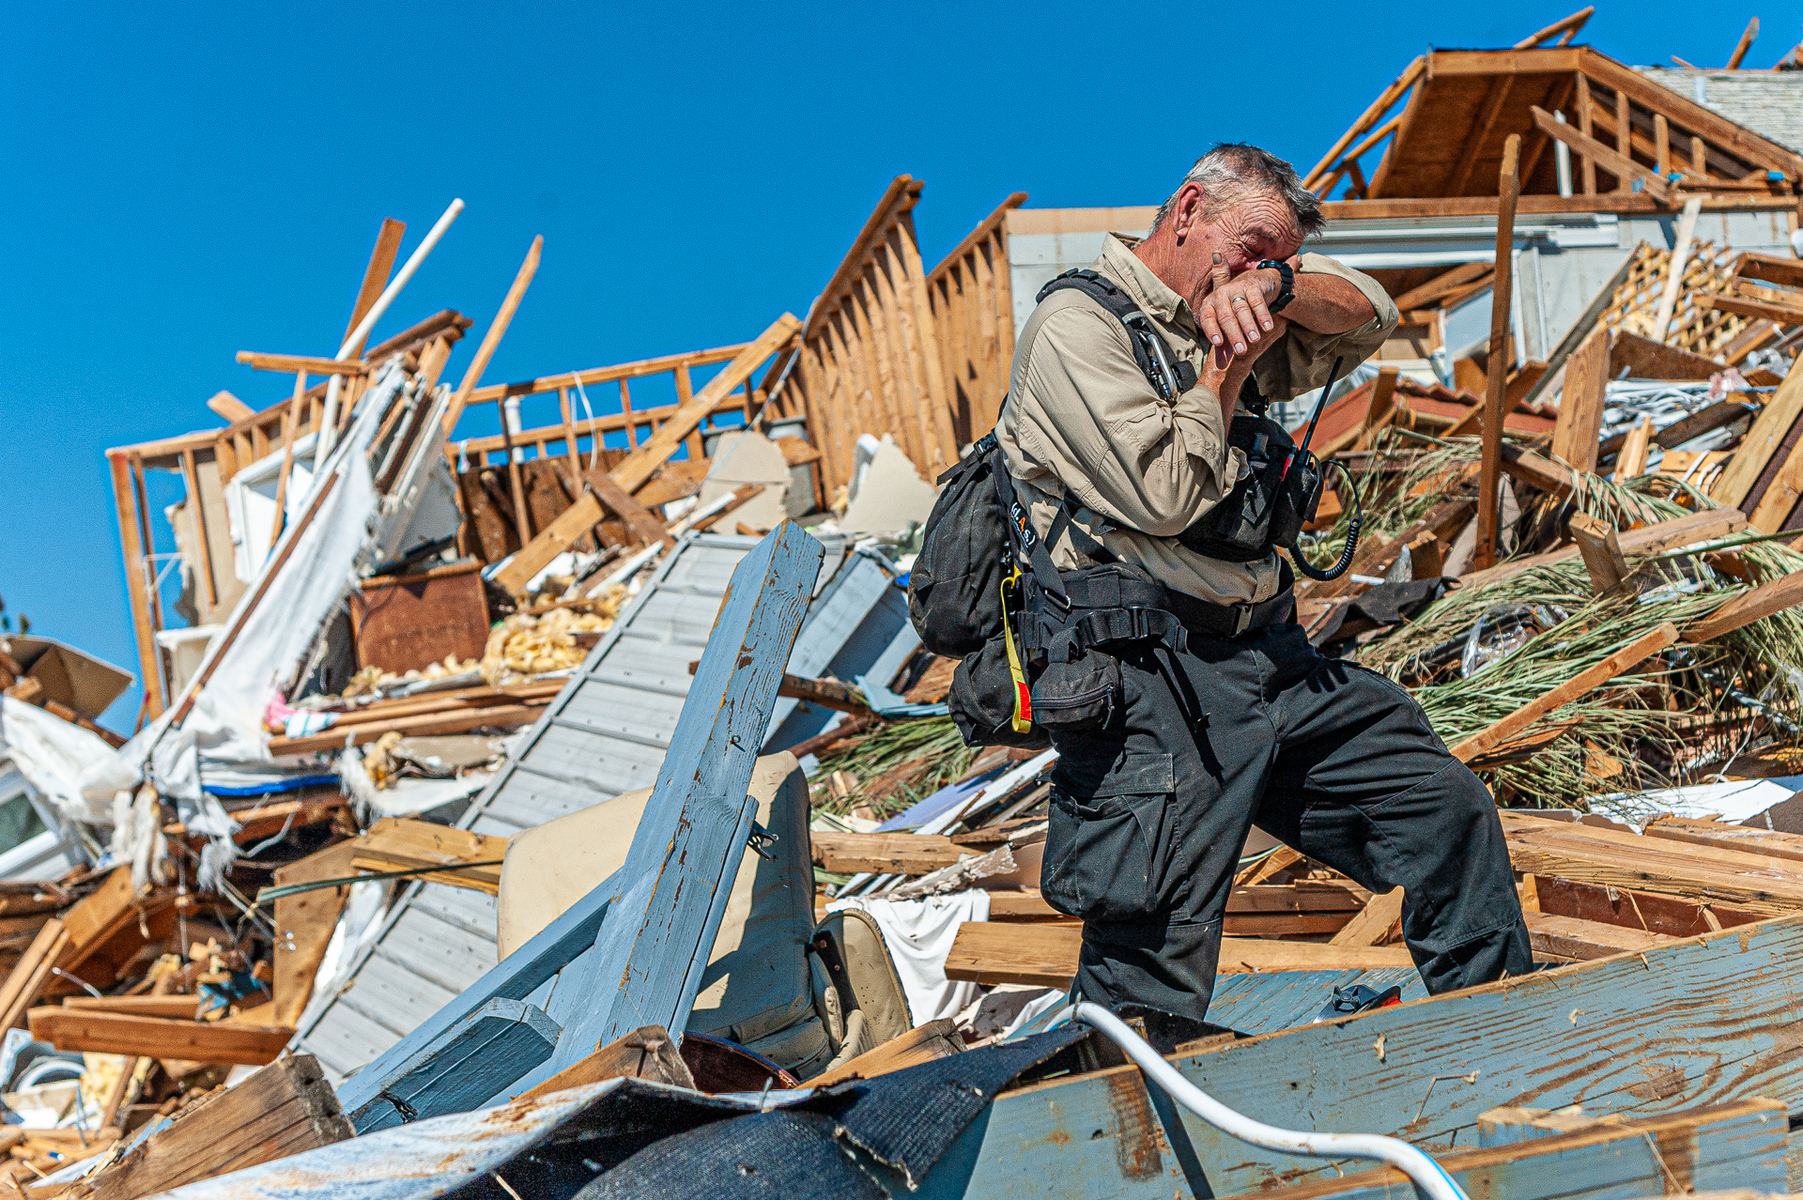 October 18, 2018 - Mexico Beach, FL - Rescue personnel perform a search in the aftermath of Hurricane Michael in Mexico Beach, Florida, on October 10, 2018.. The strongest storm on record to ever make landfall in Northwest Florida, and the fourth most powerful to ever hit the continental United States.